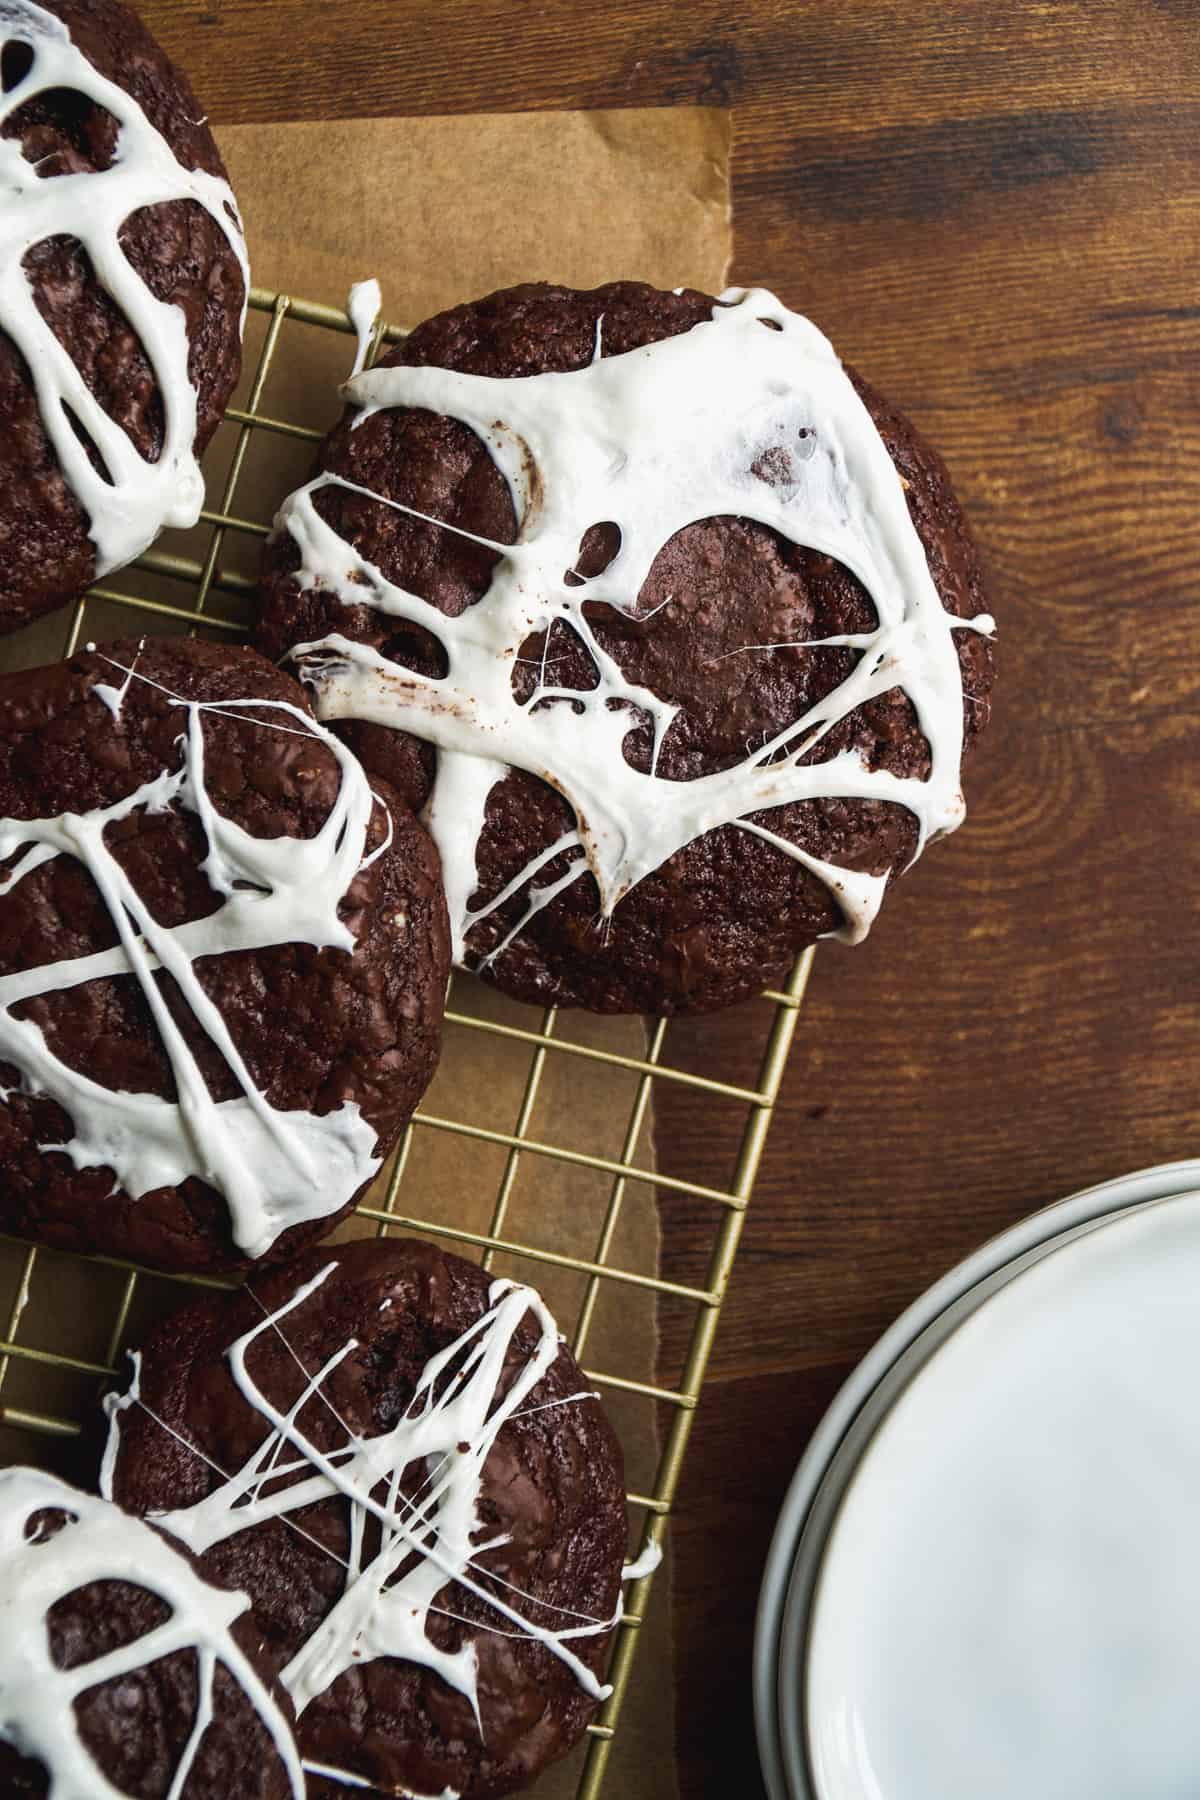 Chocolate spider web cookies on a wire rack.